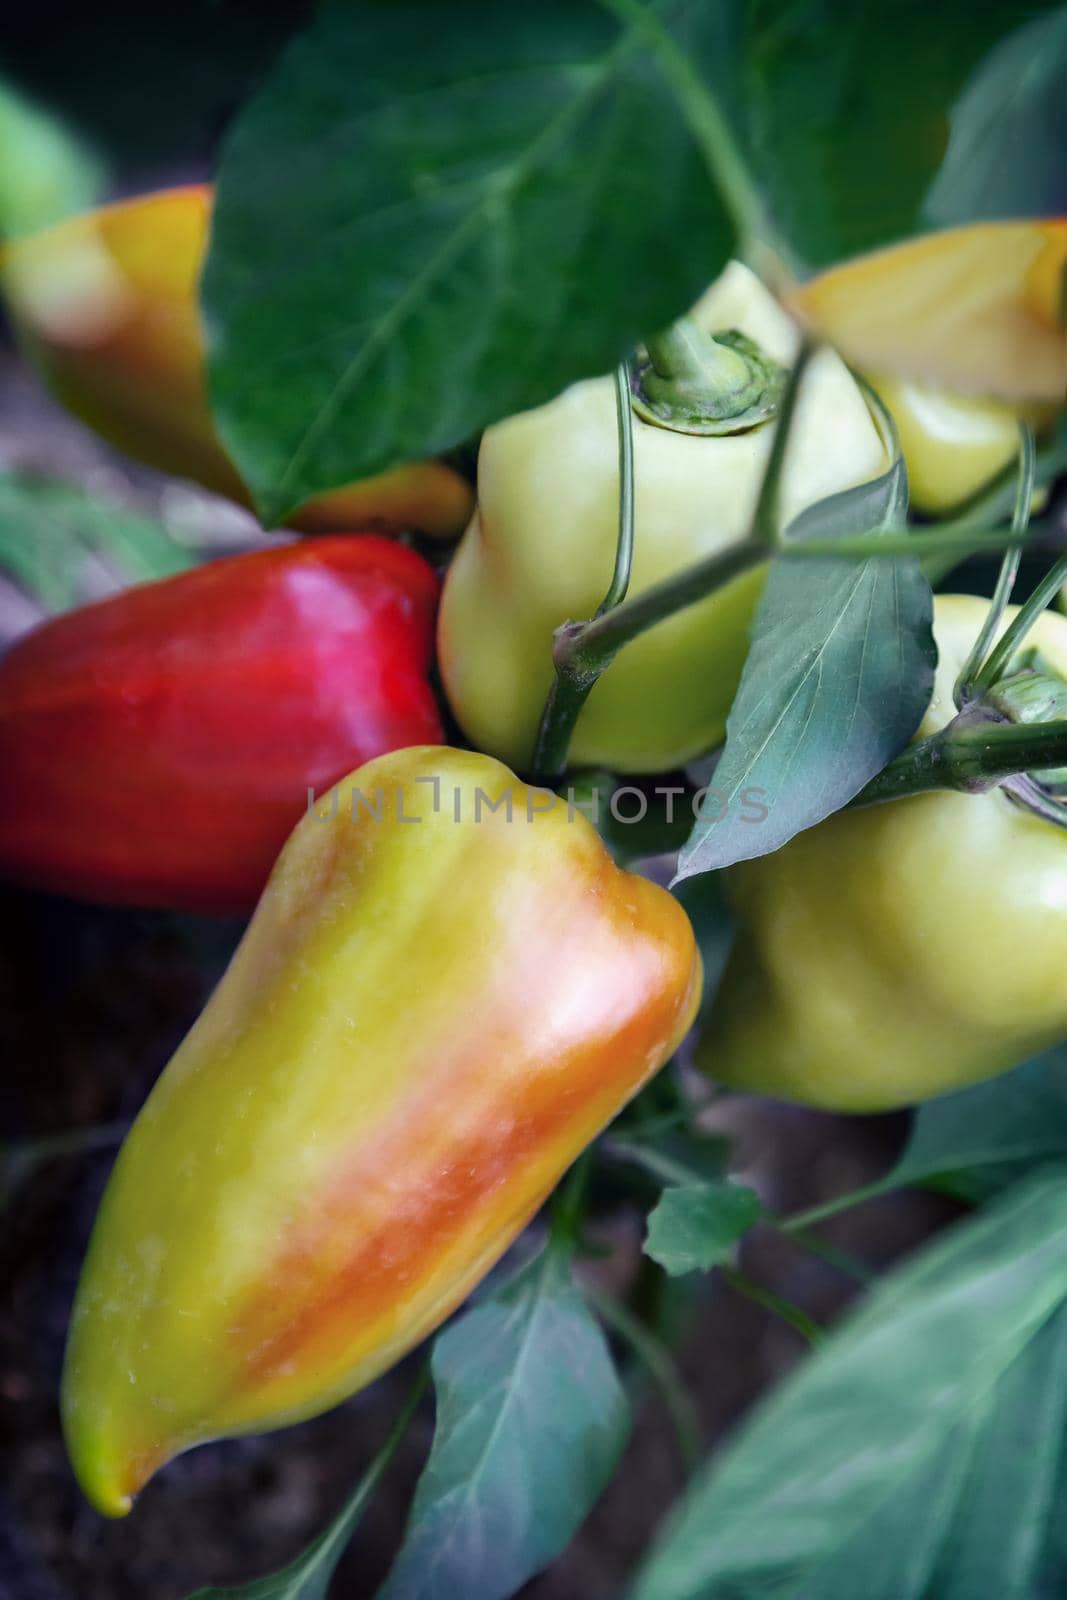 Large fruits ripen peppers in the garden. by georgina198